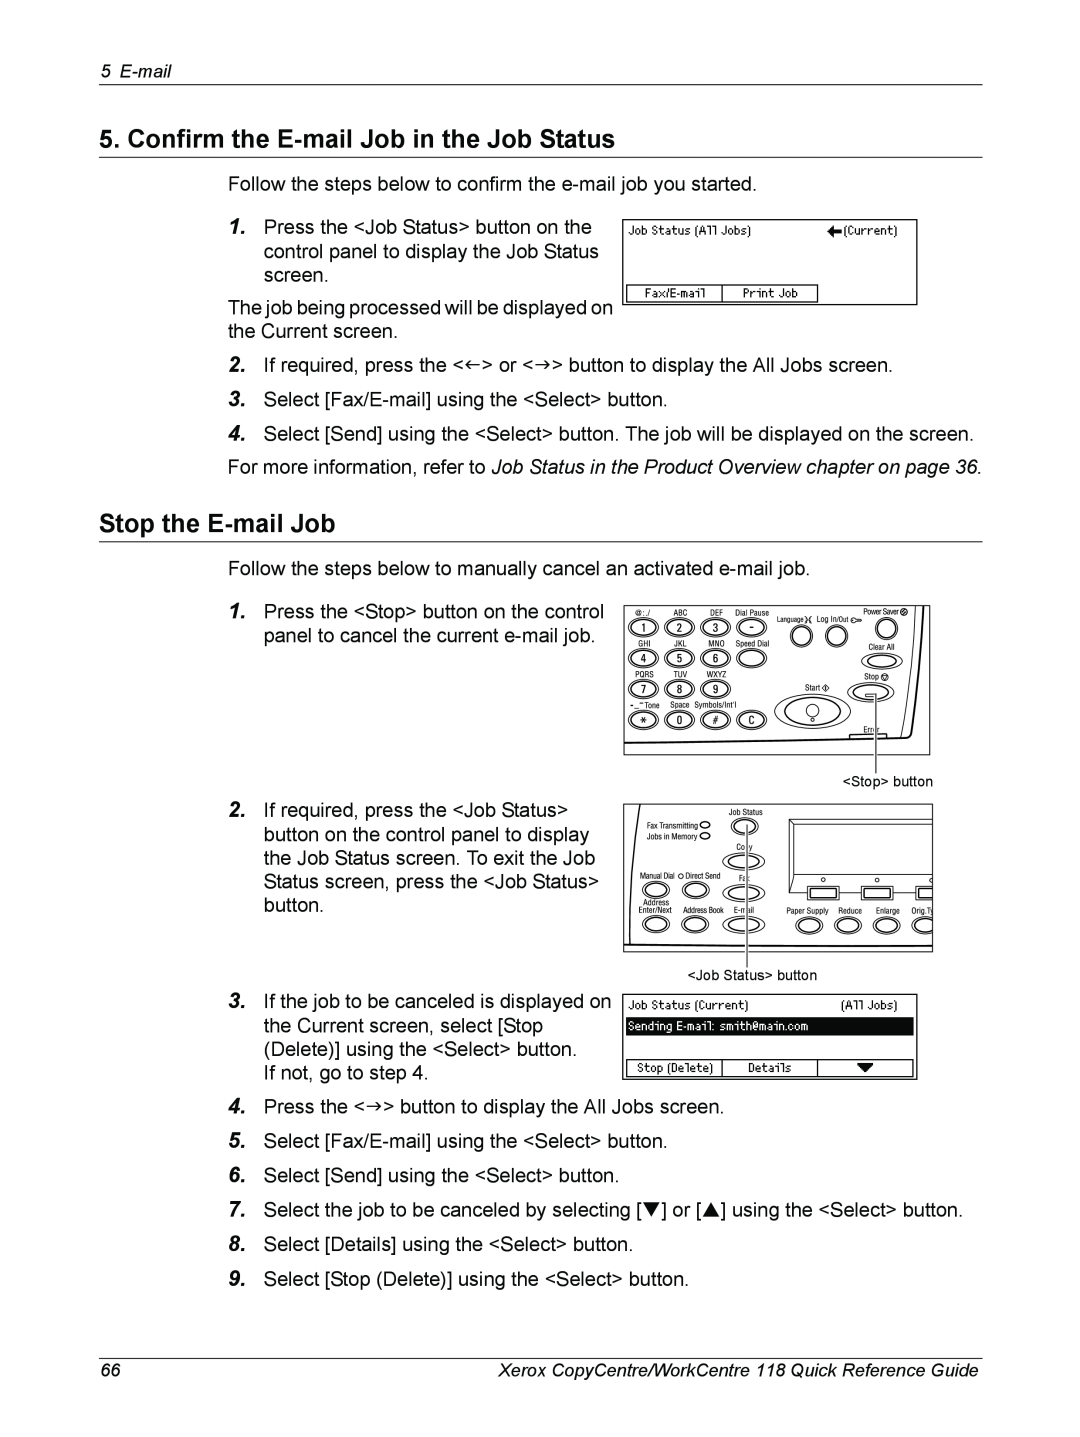 Xerox C118, M118i manual Confirm the E-mail Job in the Job Status, Stop the E-mail Job, Job Status button 